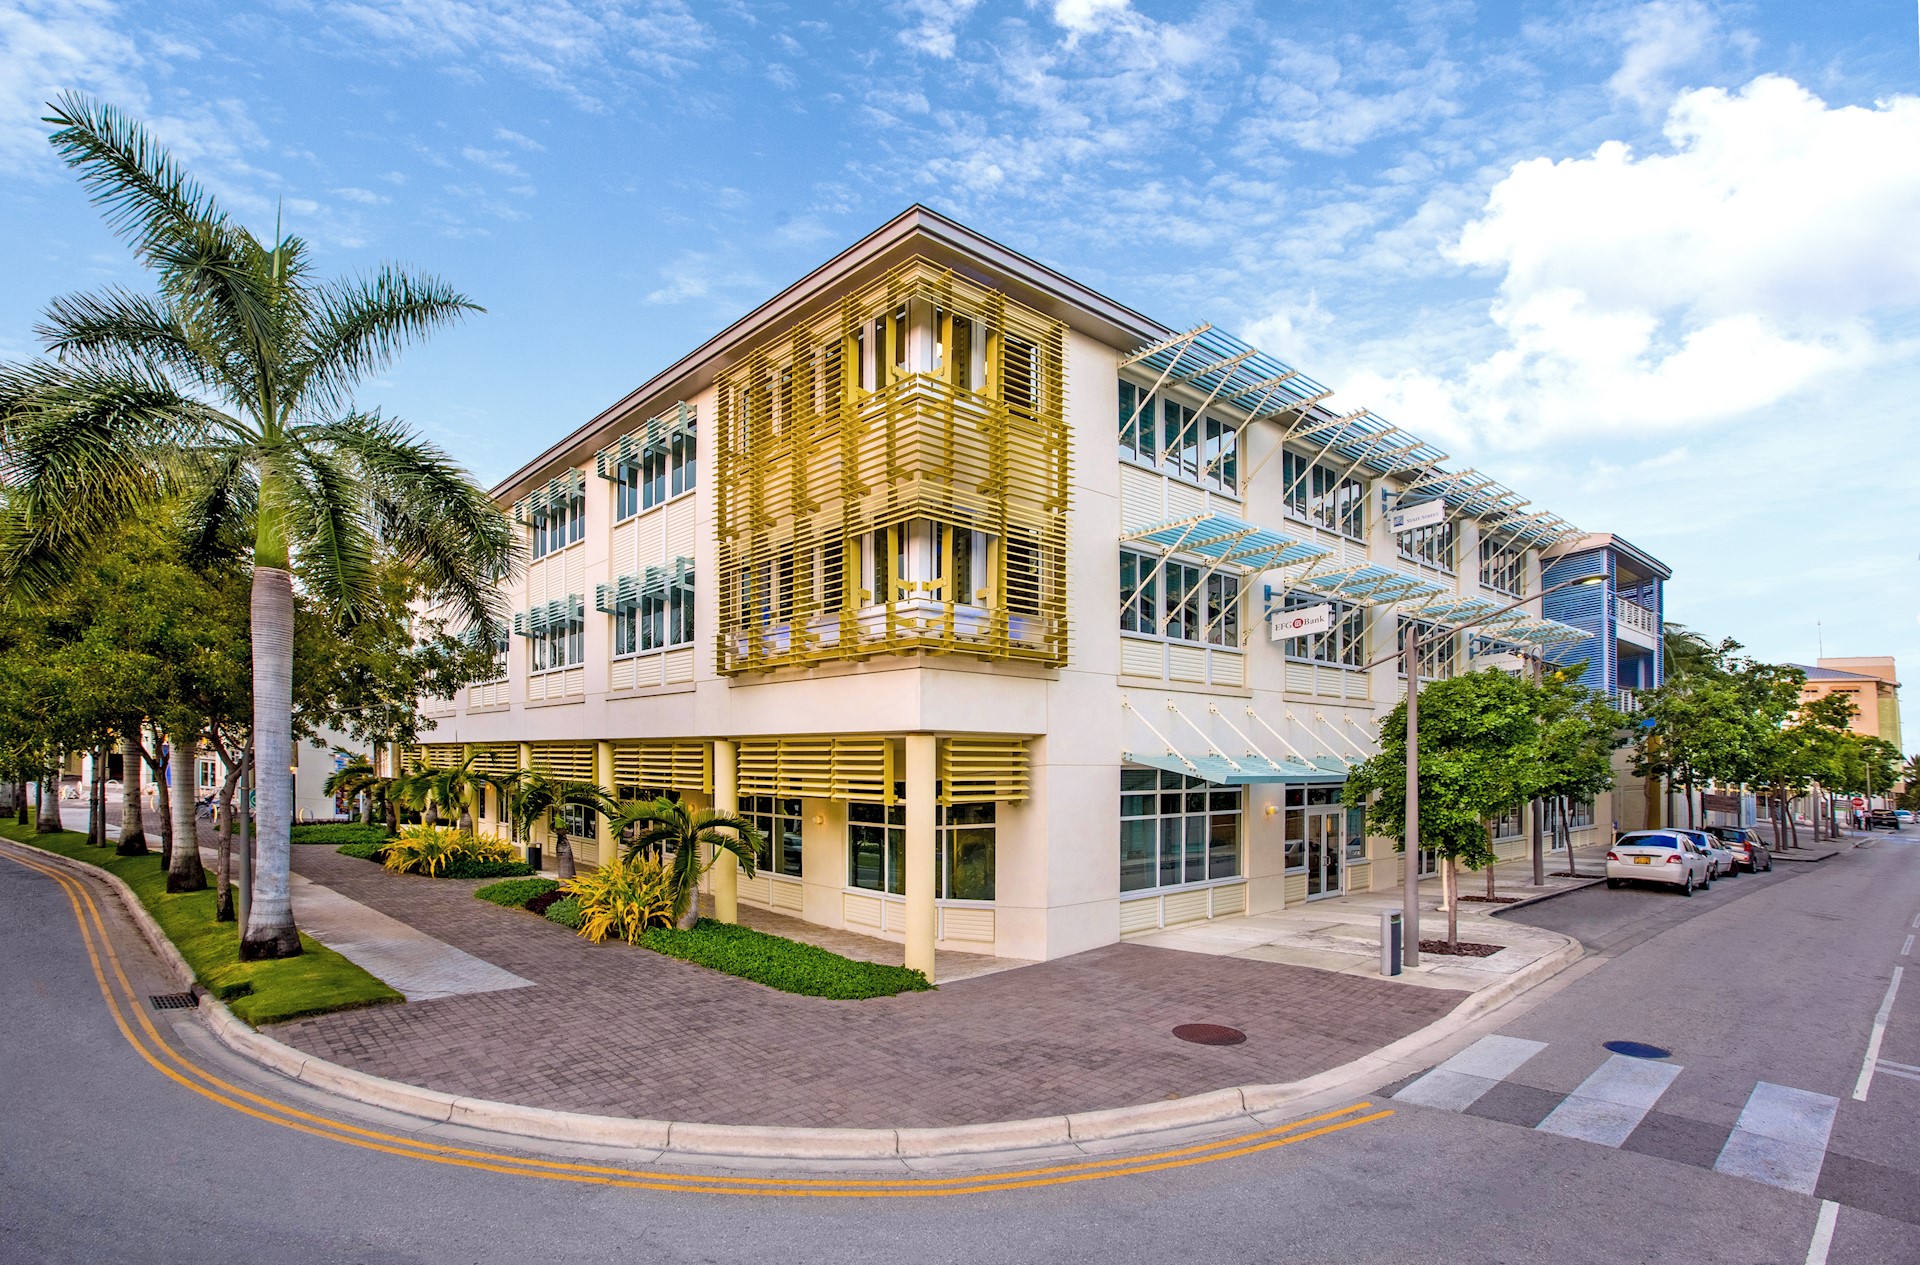 Choosing a private bank in Cayman